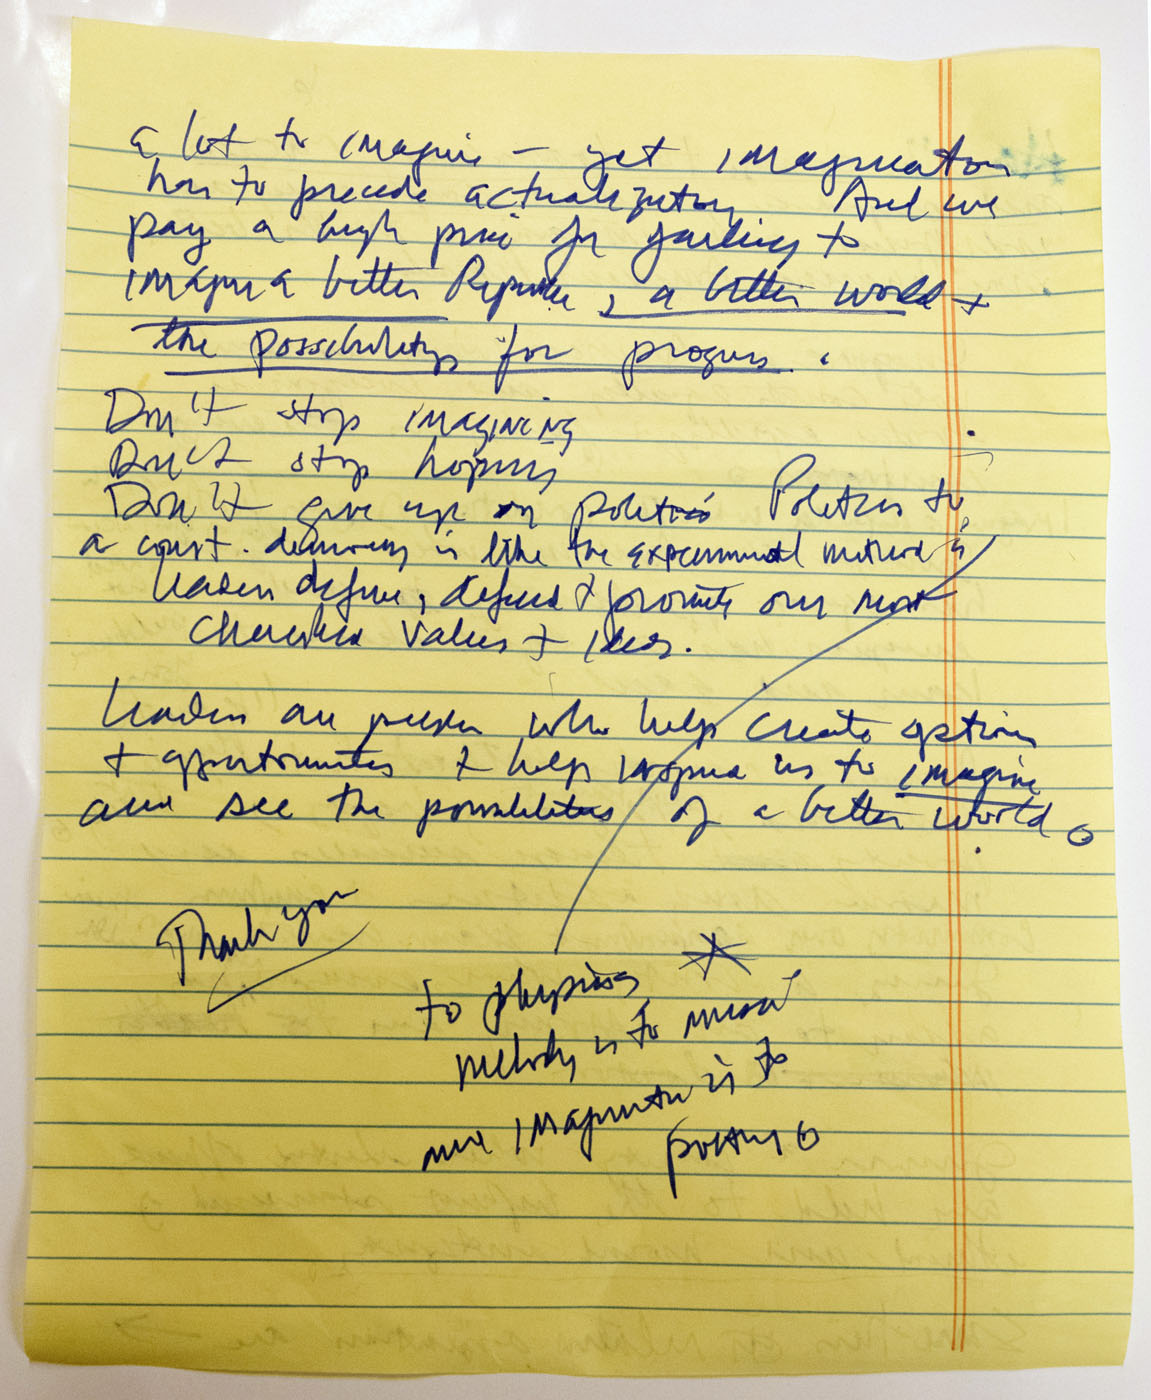 Pictured are notes from the final lecture that Cronin gave.